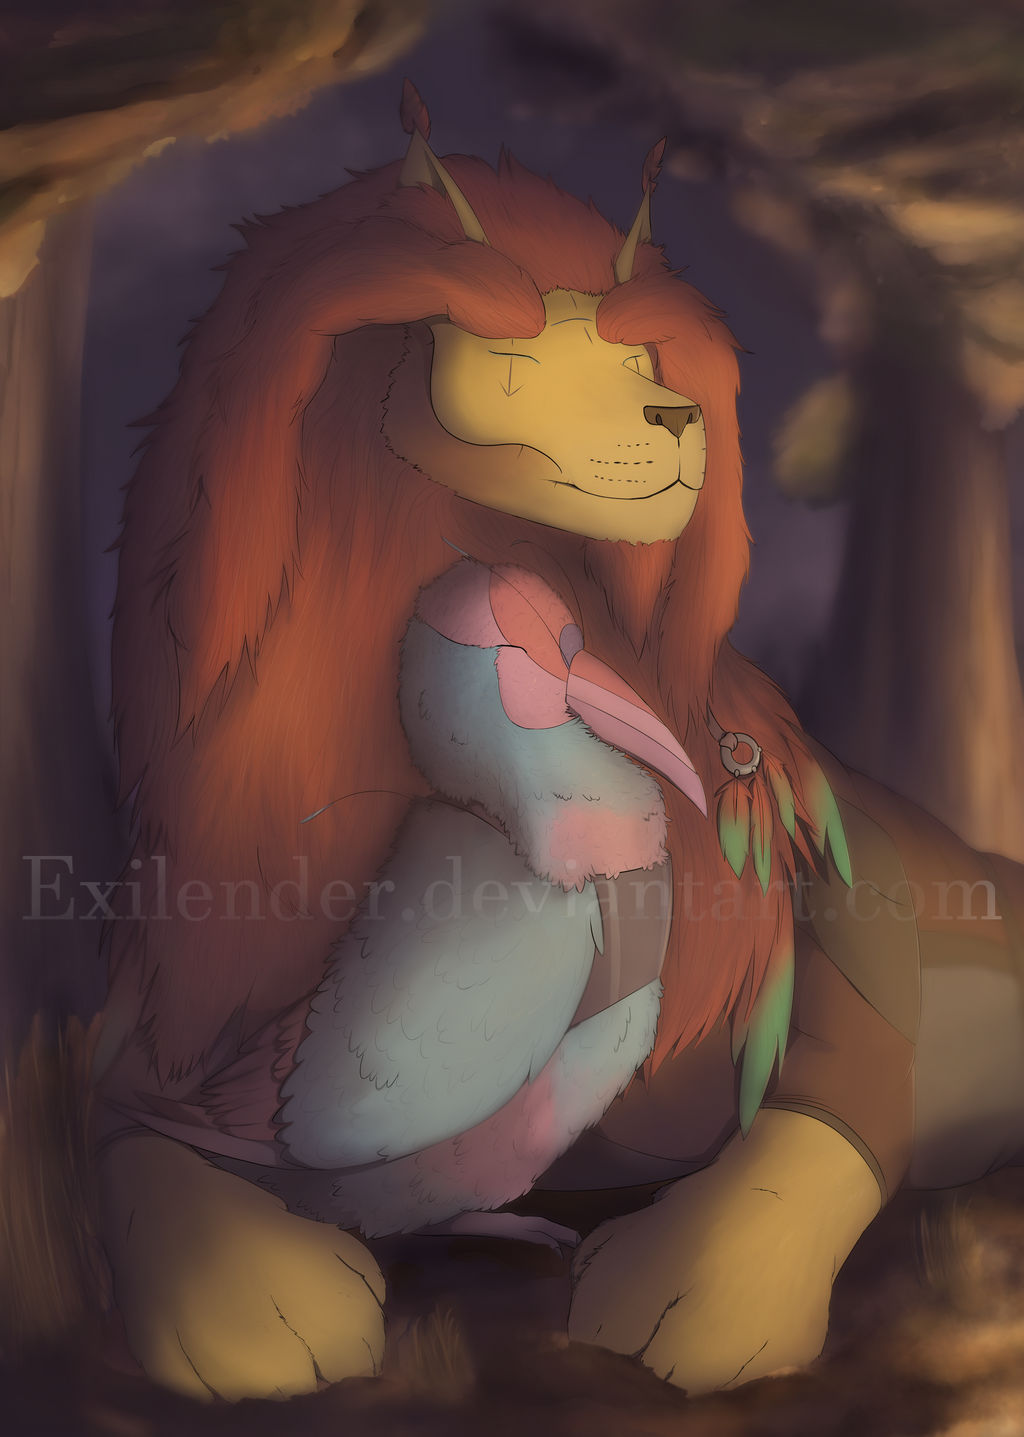 campfire_by_exilender_daxih33-fullview.j